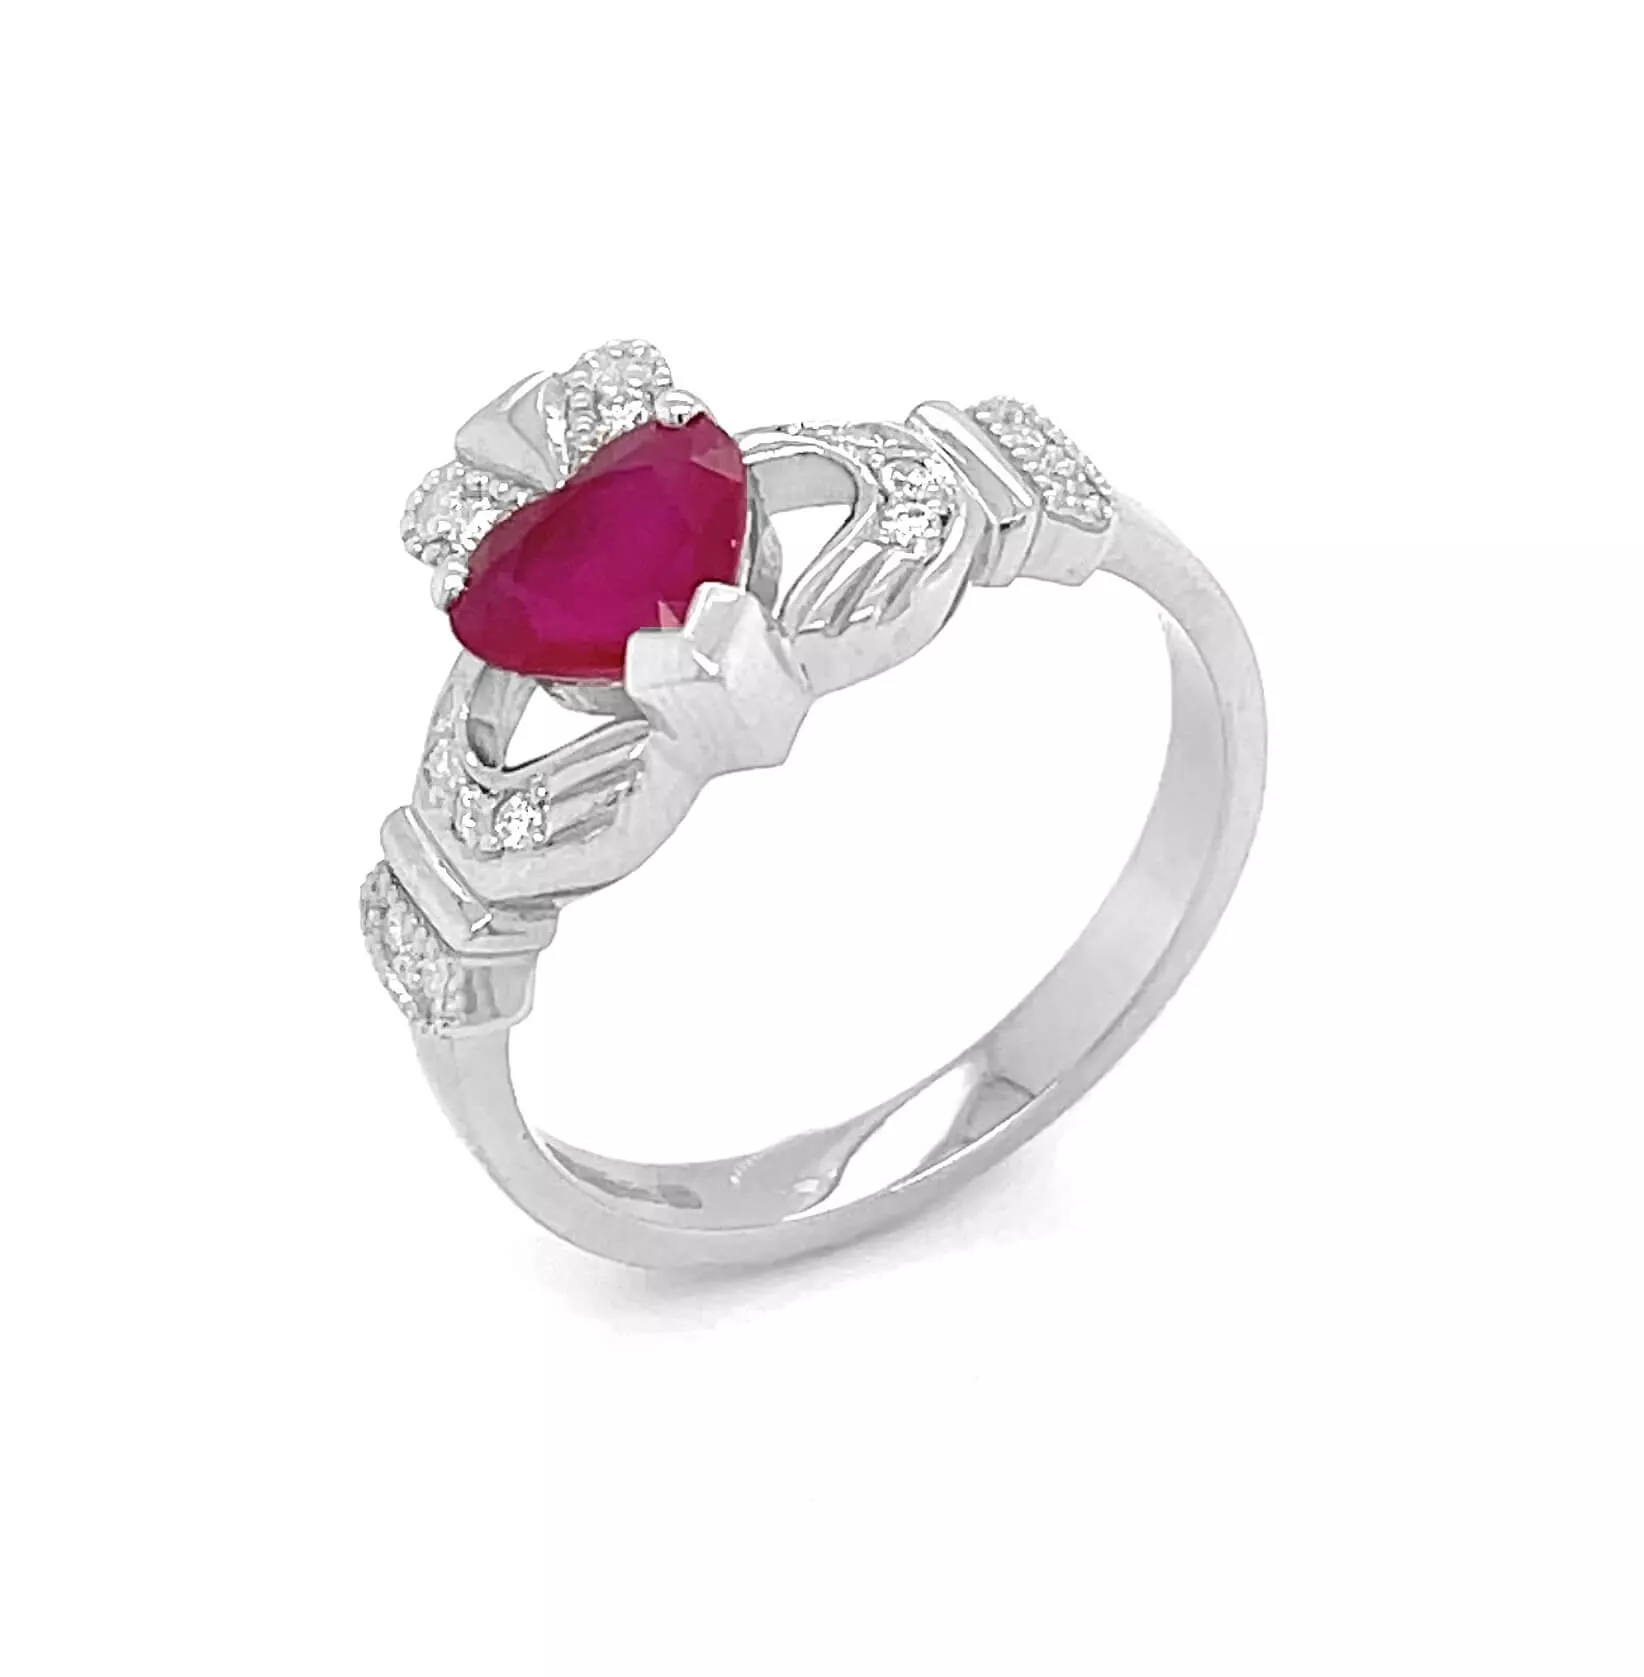 Ruby Claddagh Engagement Ring 2 2